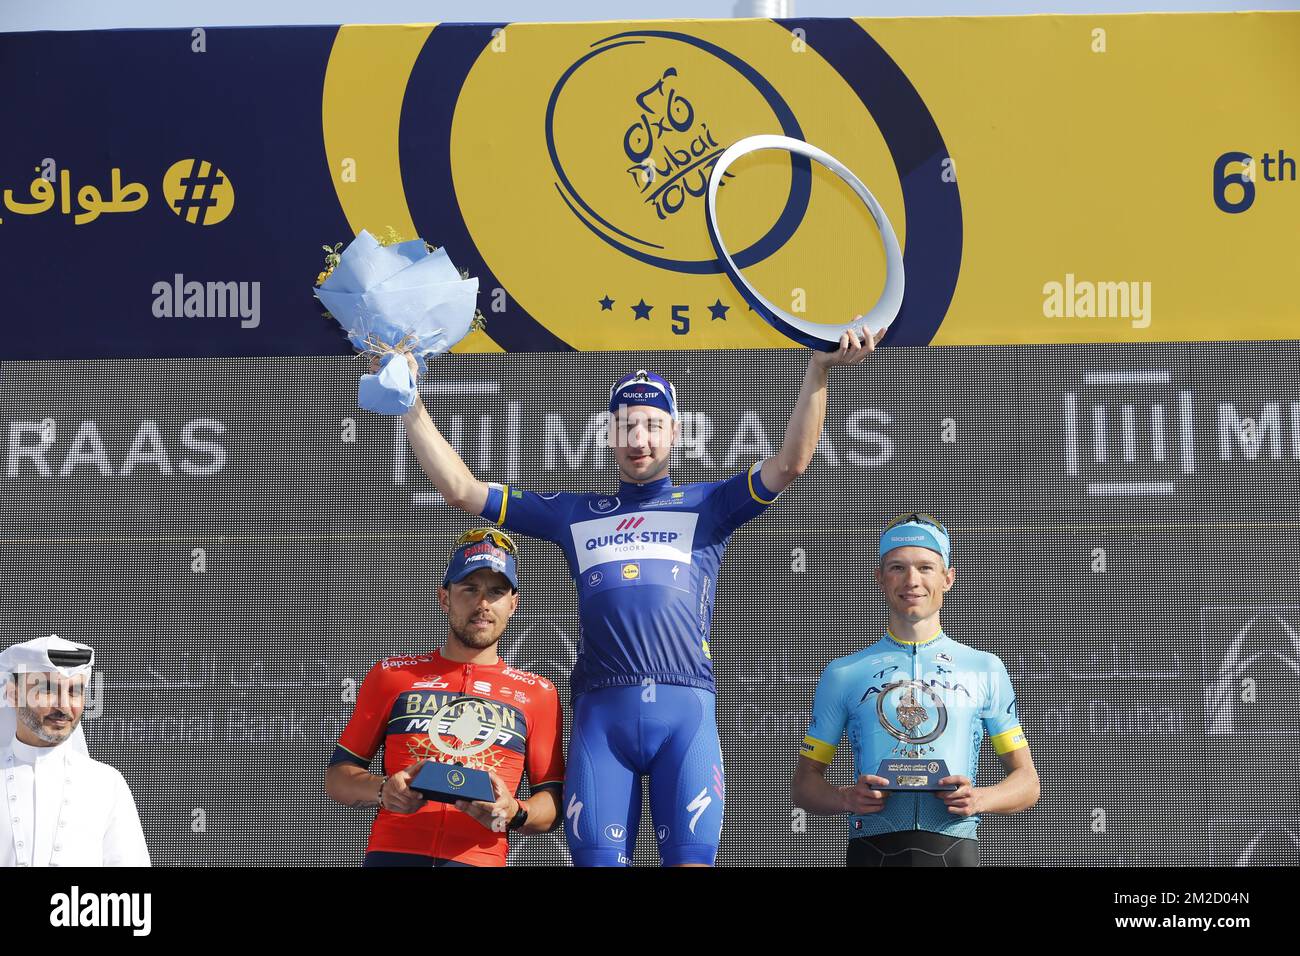 Italian Elia Viviani of Quick-Step Floors, Danish Magnus Cort of Astana Pro Team and Italian Sonny Colbrelli of Bahrain-Merida celebrate on the final podium of General Classification after the fifth and last stage of the Dubai Tour 2018 cycling race, 129 km from the Skydive and the city WAlk in Dubai, United Arab Emirates, Saturday 10 February 2018. The Dubai Tour 2018 is taking place from 6 to 10 February. BELGA PHOTO YUZURU SUNADA Stock Photo